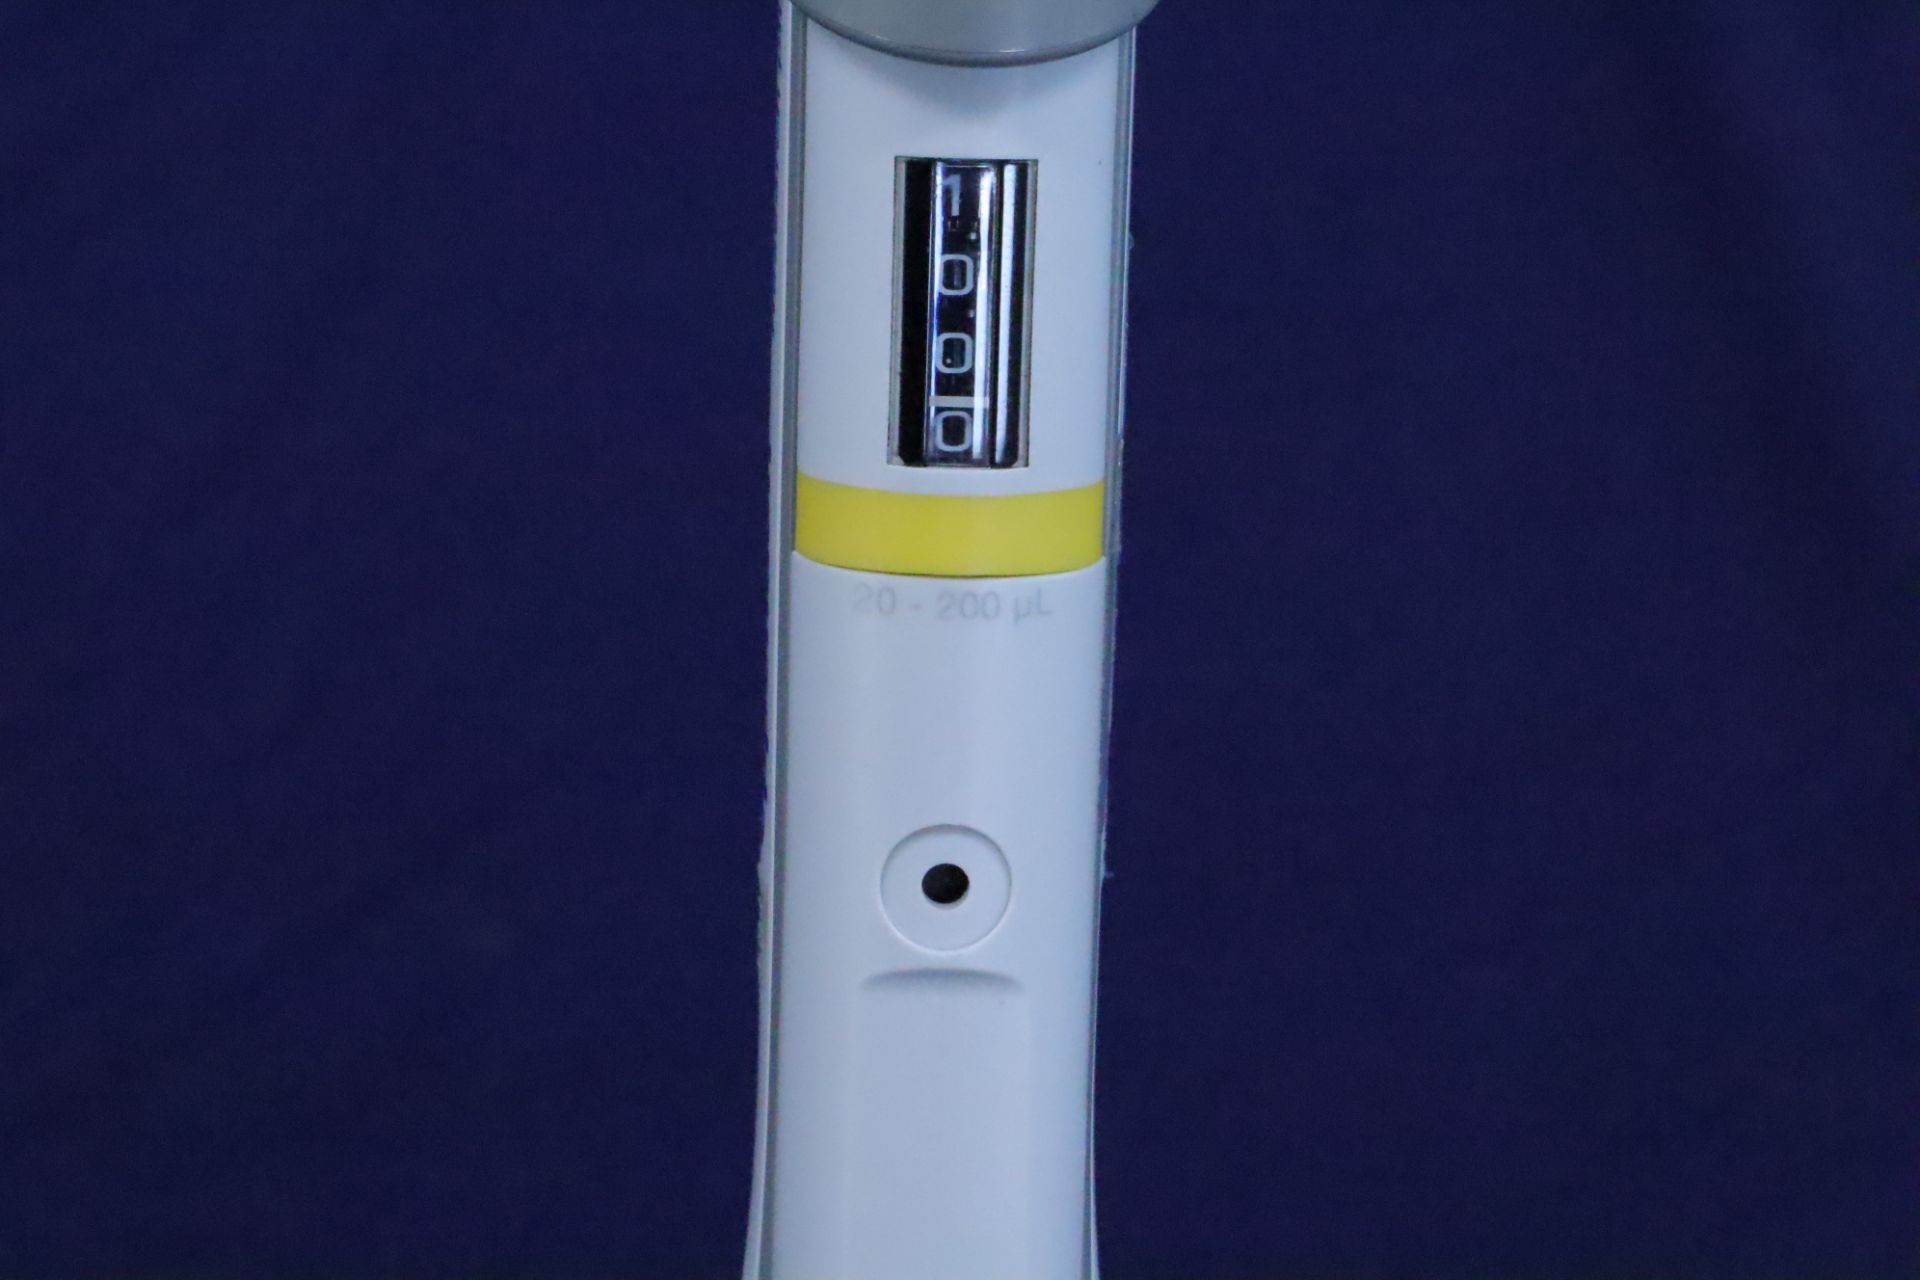 Eppendorf Research Plus Adjustable Volume Pipette 20-200 uL - Image 3 of 4